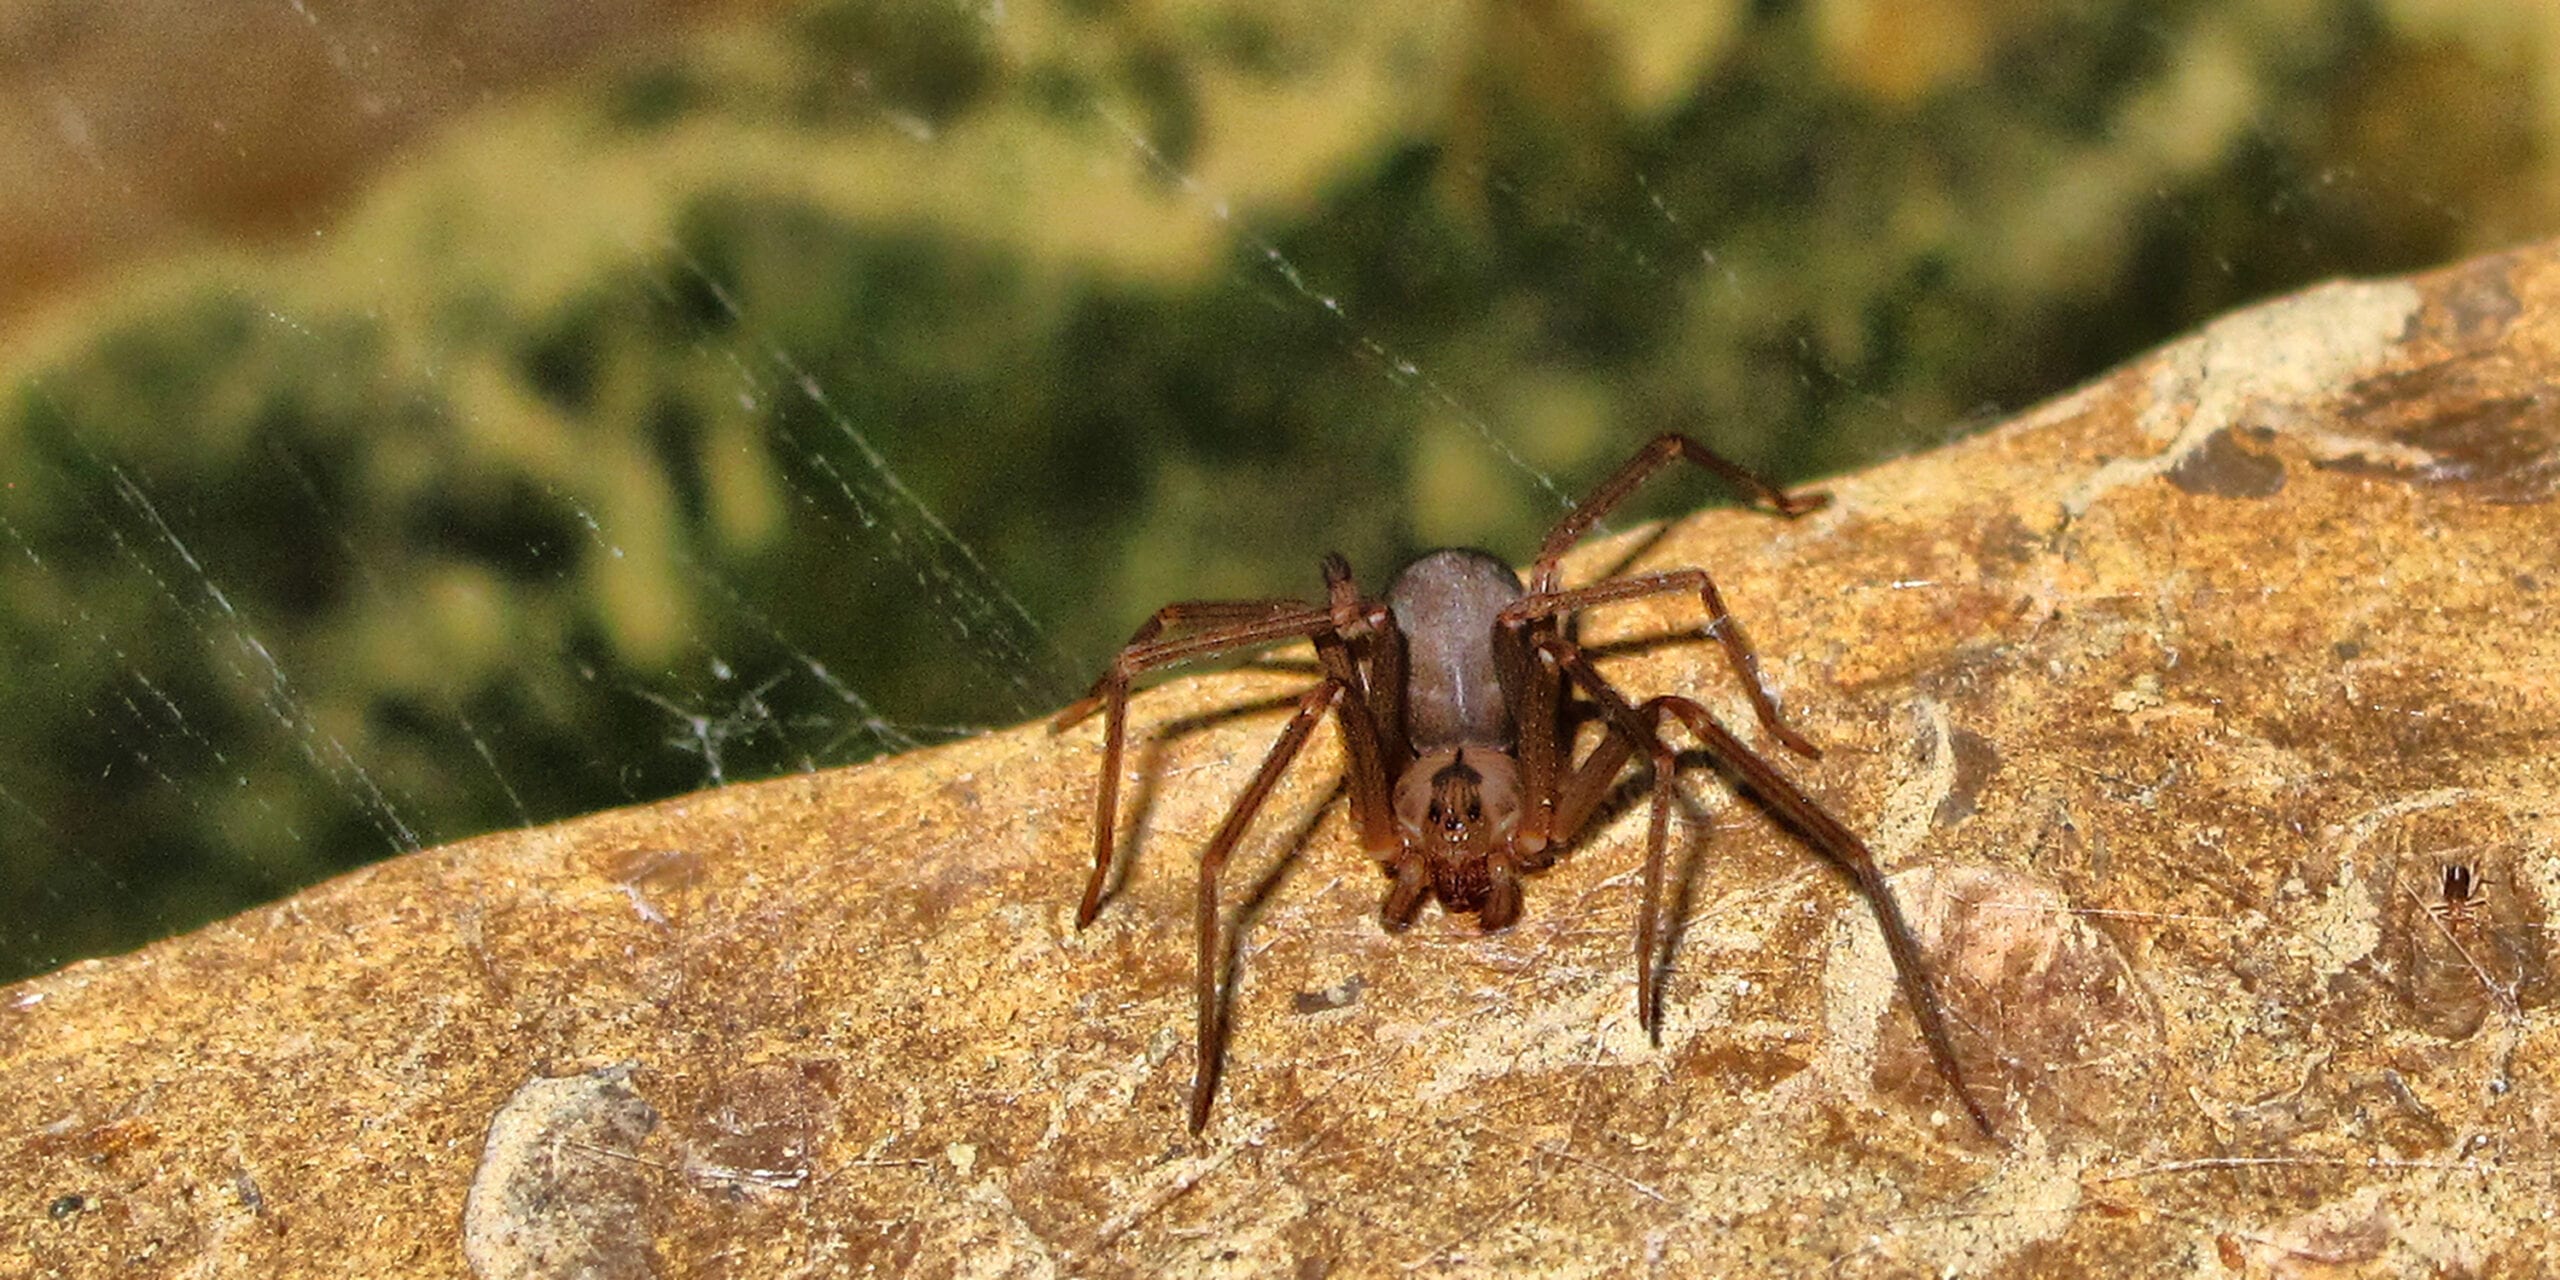 A brown recluse. RDM successfully defended a premises liability claim involving a spider bite at a hotel.